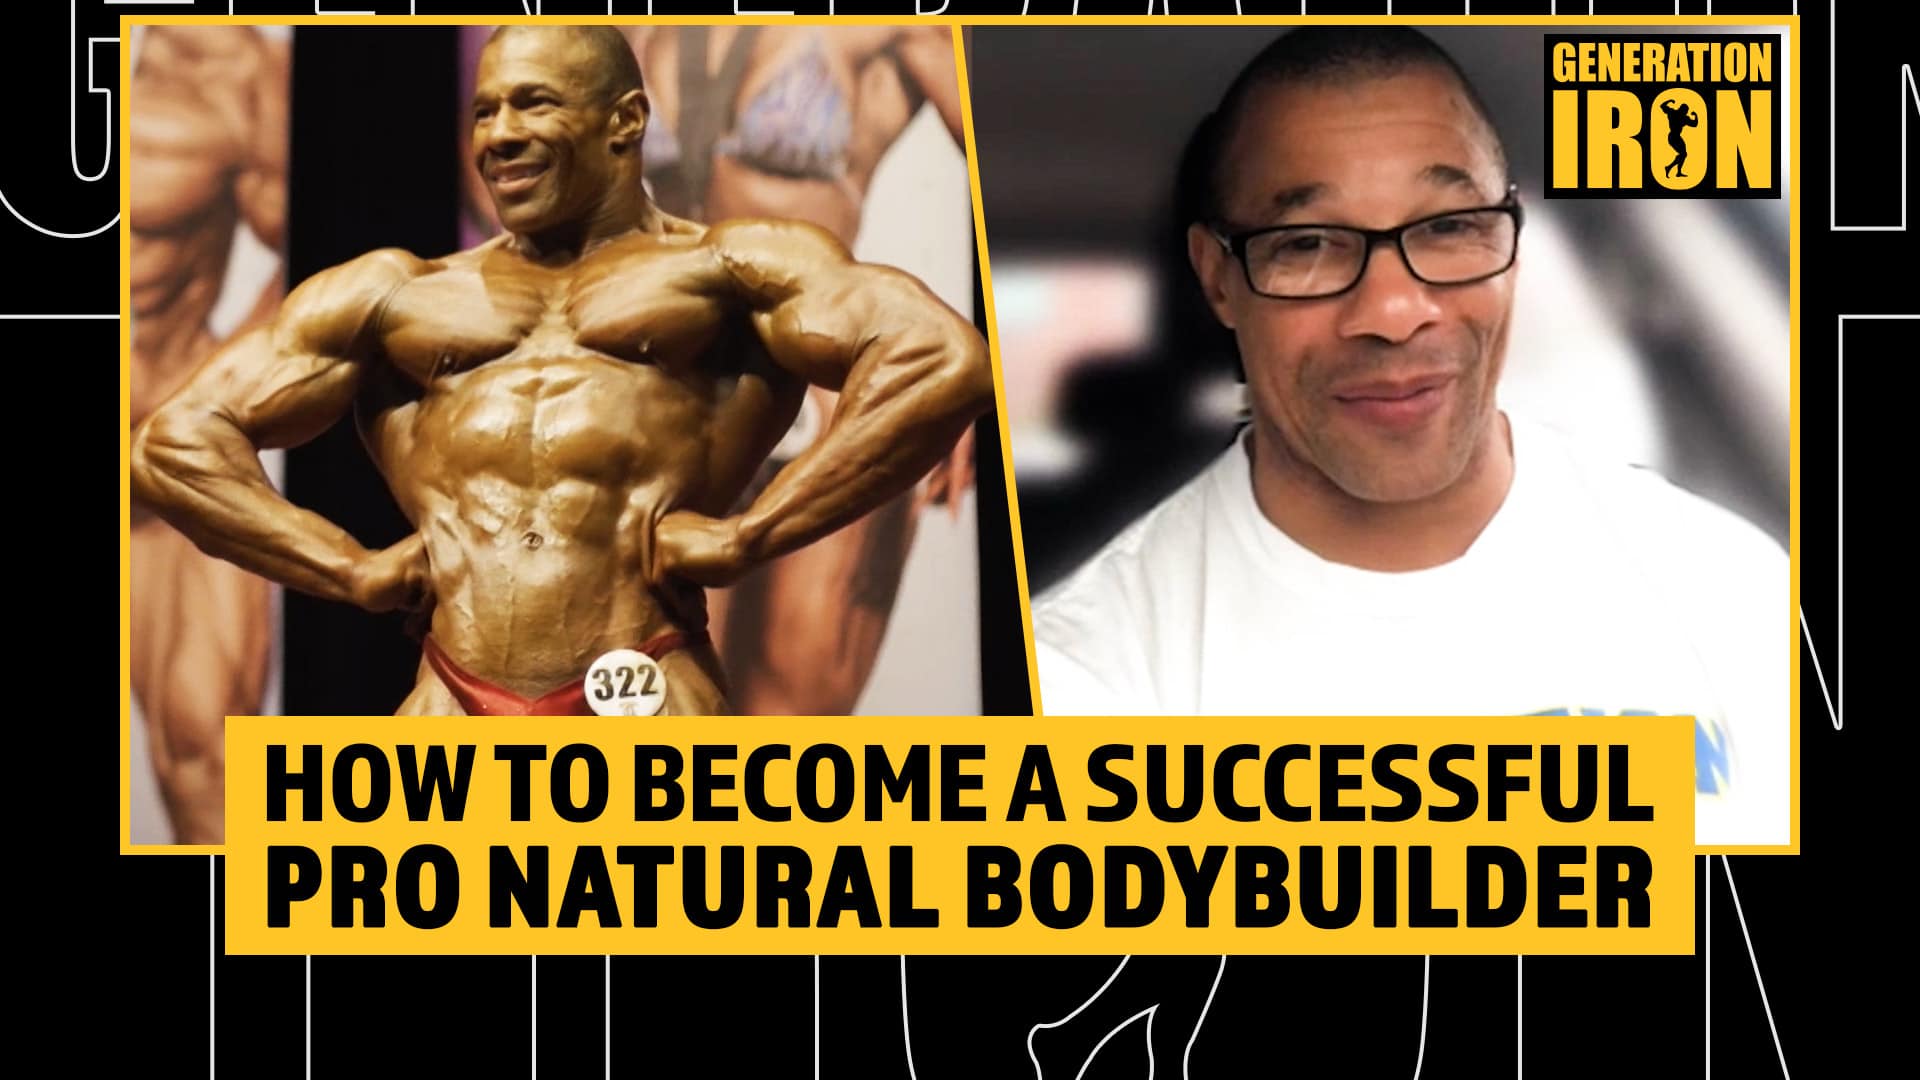 Philip Ricardo Jr: How To Become A Successful Pro Natural Bodybuilder